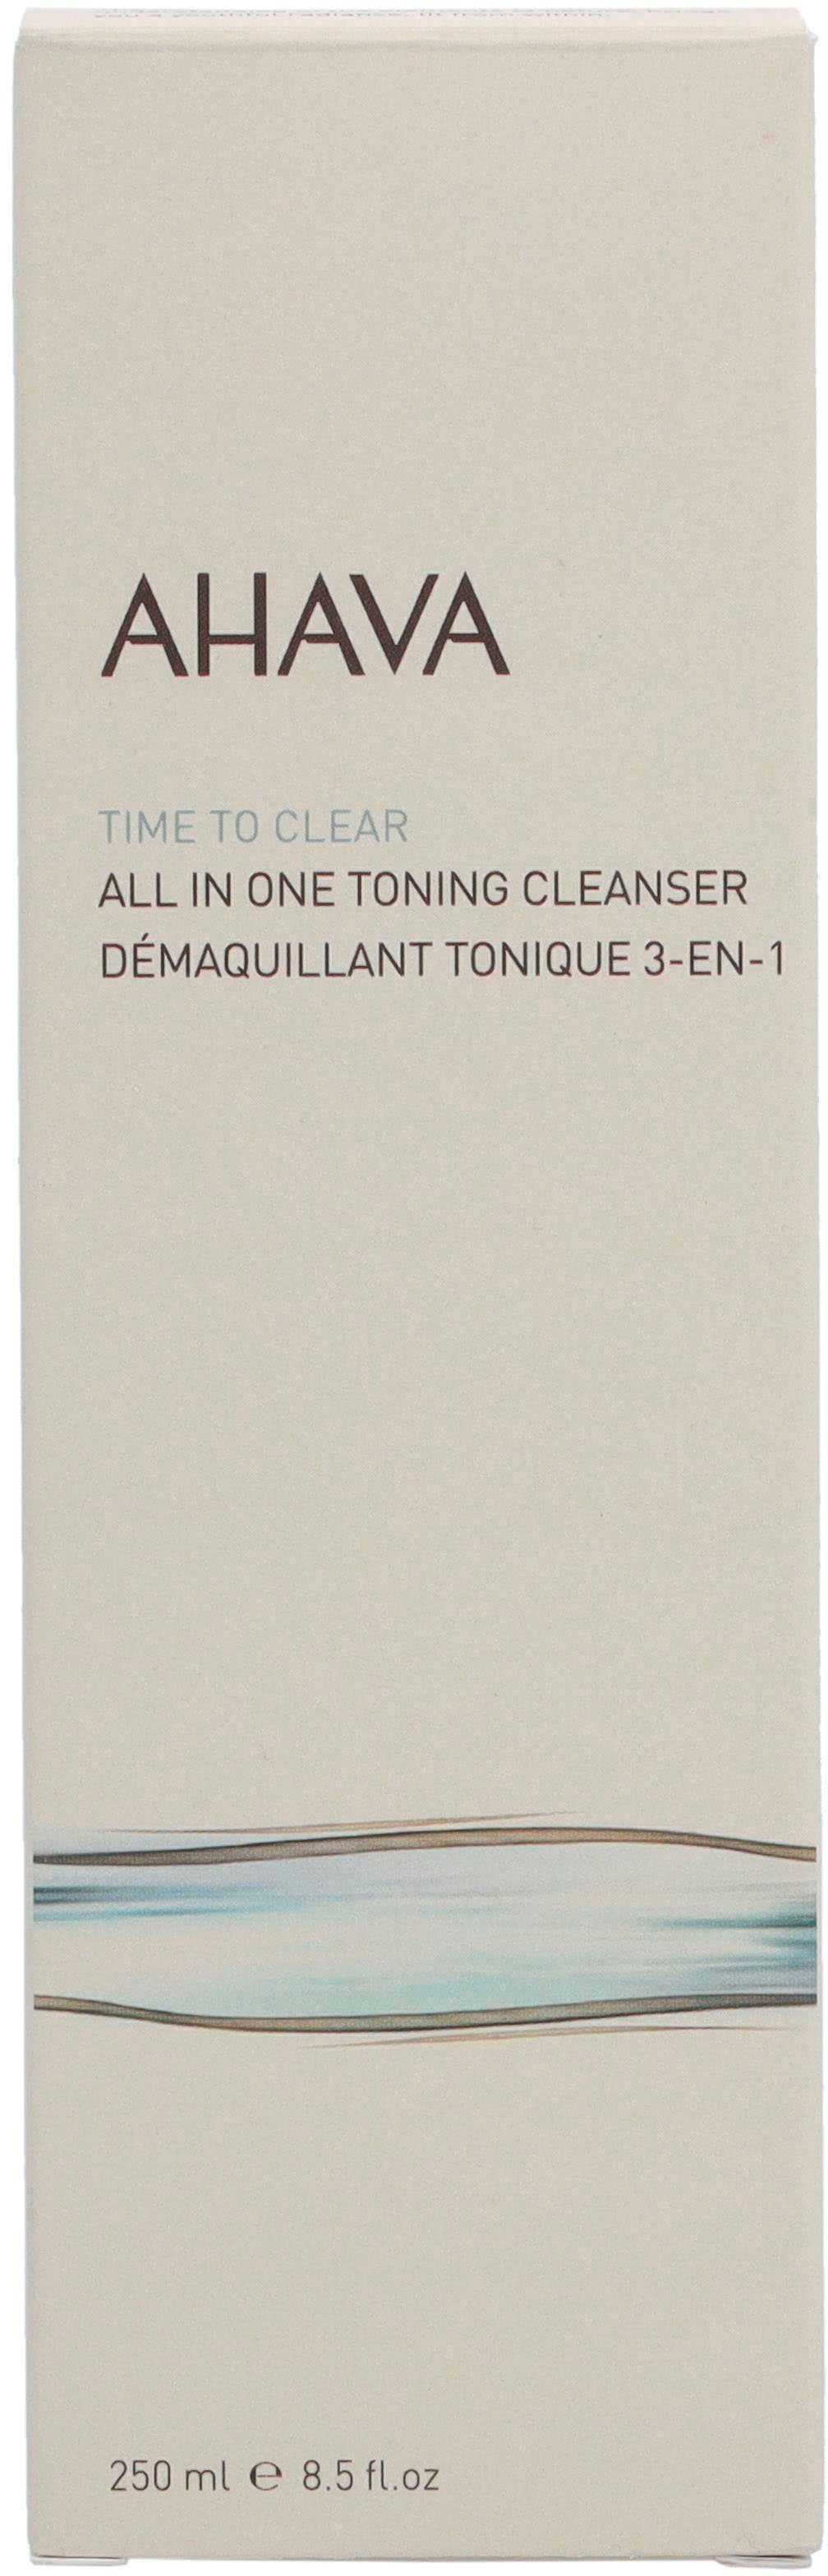 Time In Clear All Gesichts-Reinigungslotion Toning Cleanser To AHAVA One